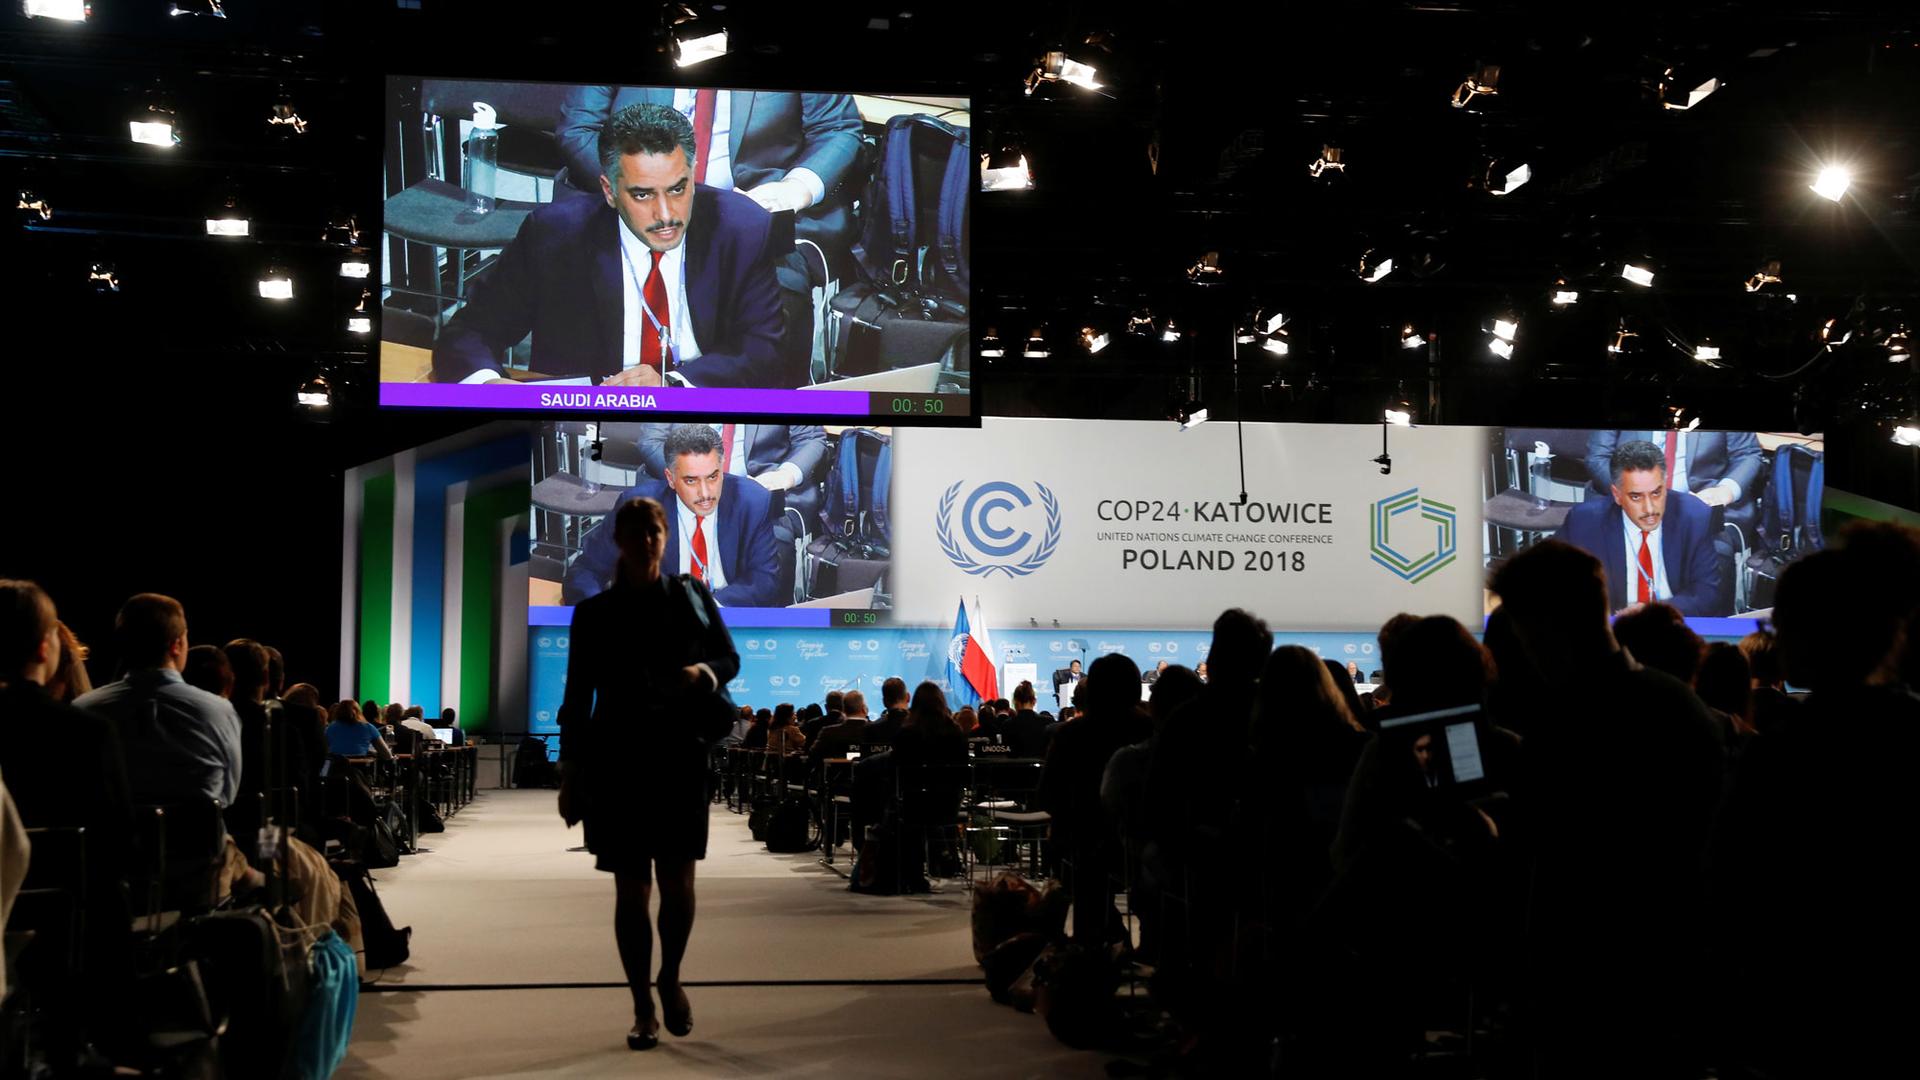 Participants take part in the plenary session during COP24 UN Climate Change Conference 2018 in Poland, Dec. 4, 2018.